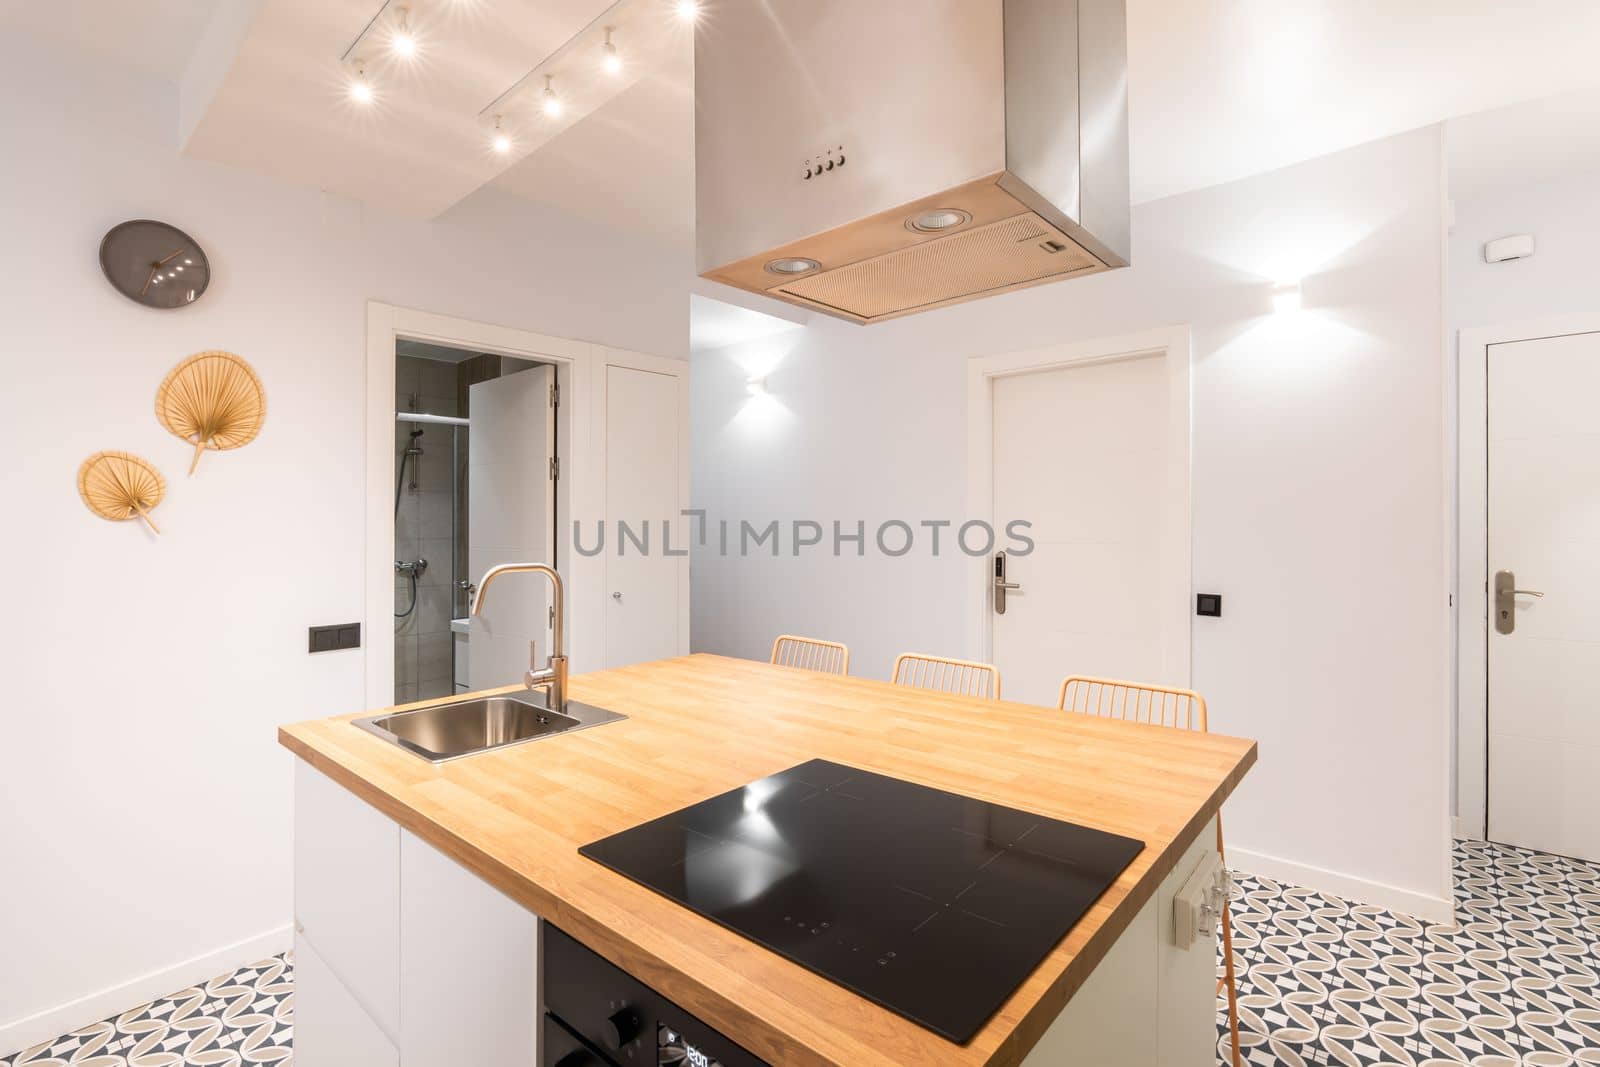 An island table in spacious studio kitchen in modern apartment with trendy author's design. On wooden surface there is an induction electric stove above it with an exhaust system. Mosaic tile floor